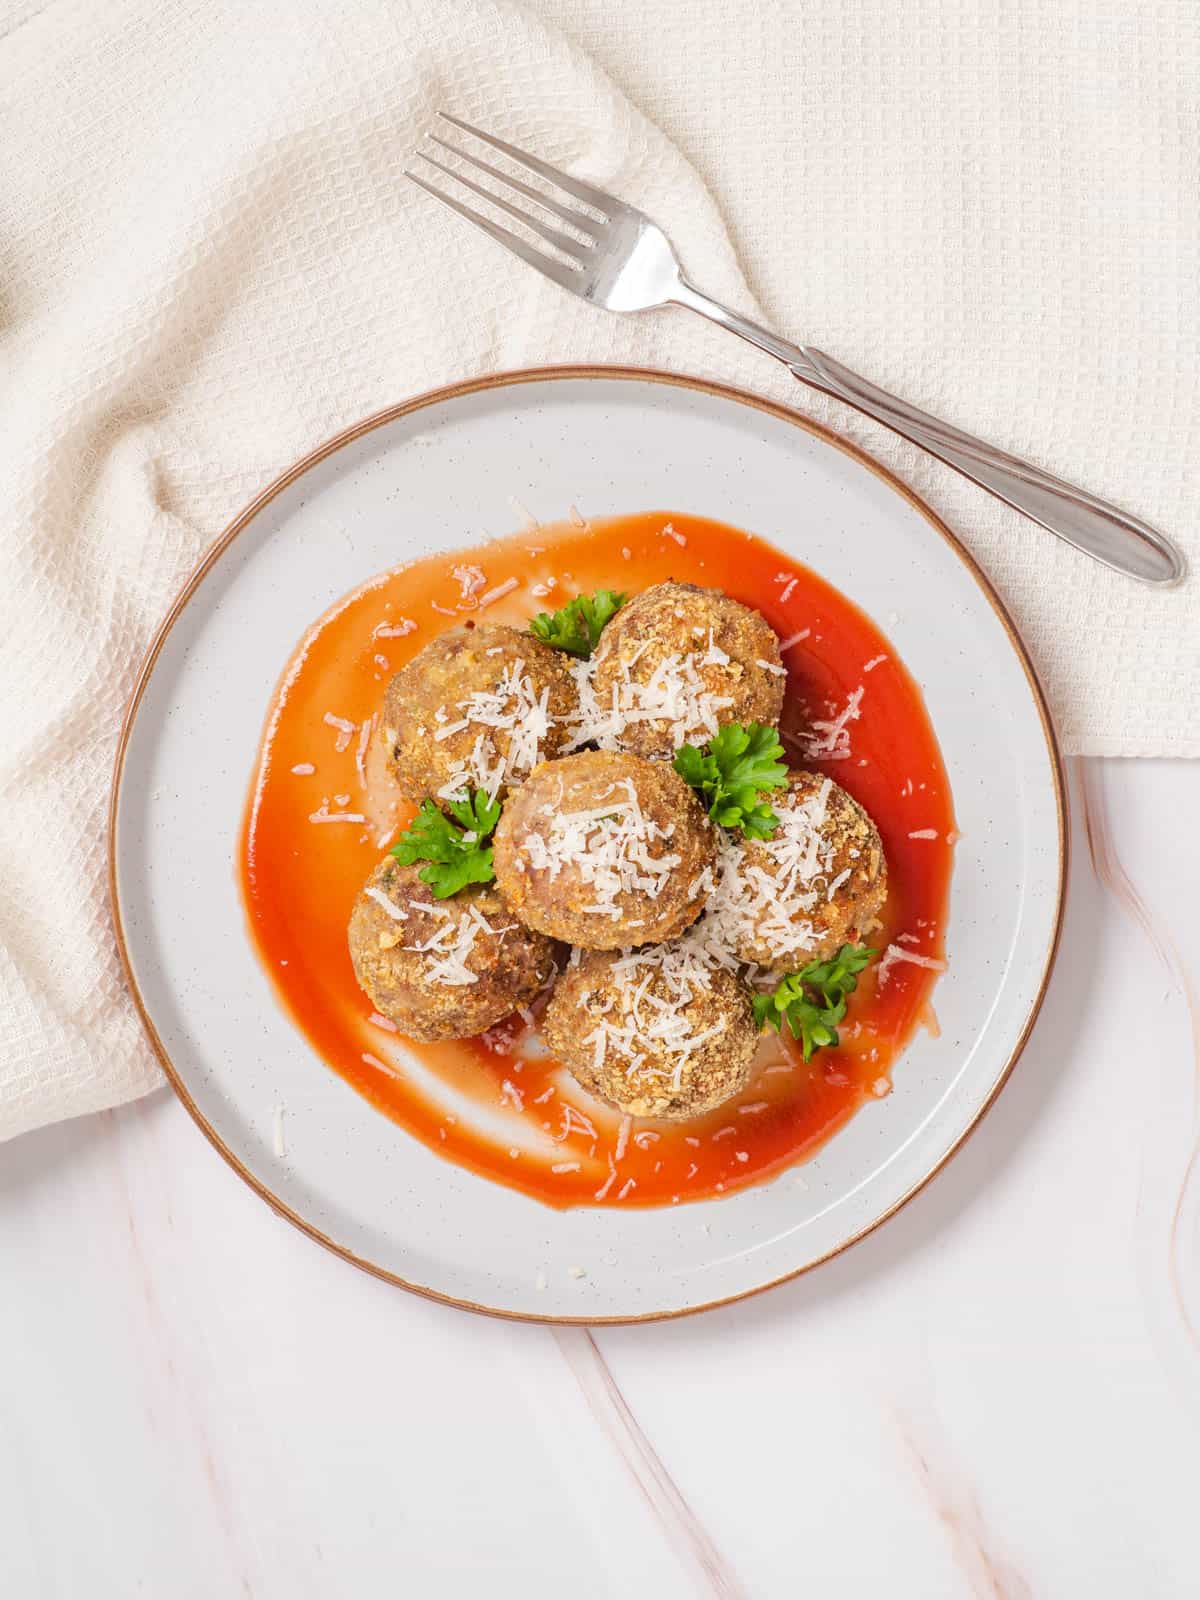 A plate with marinara sauce and air fryer meatballs.